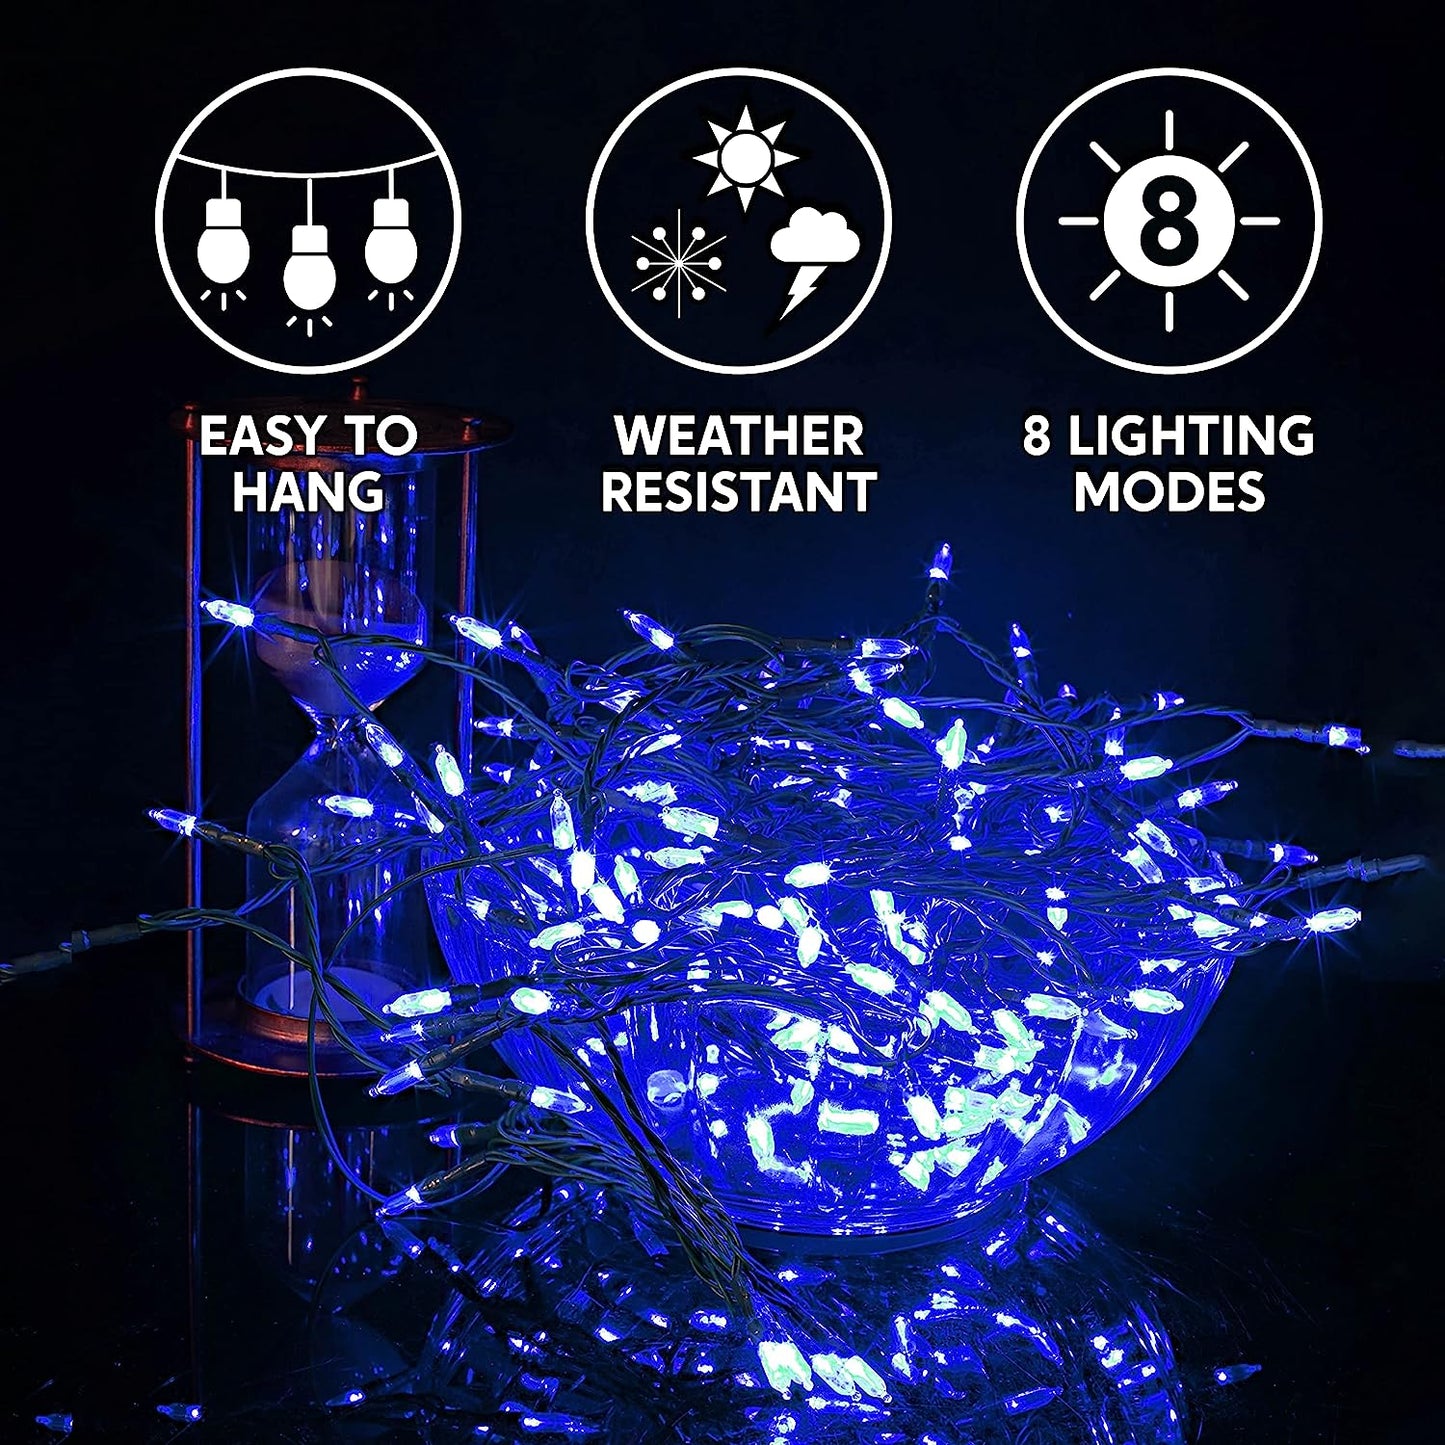 50 Blue LED Green Wire String Lights